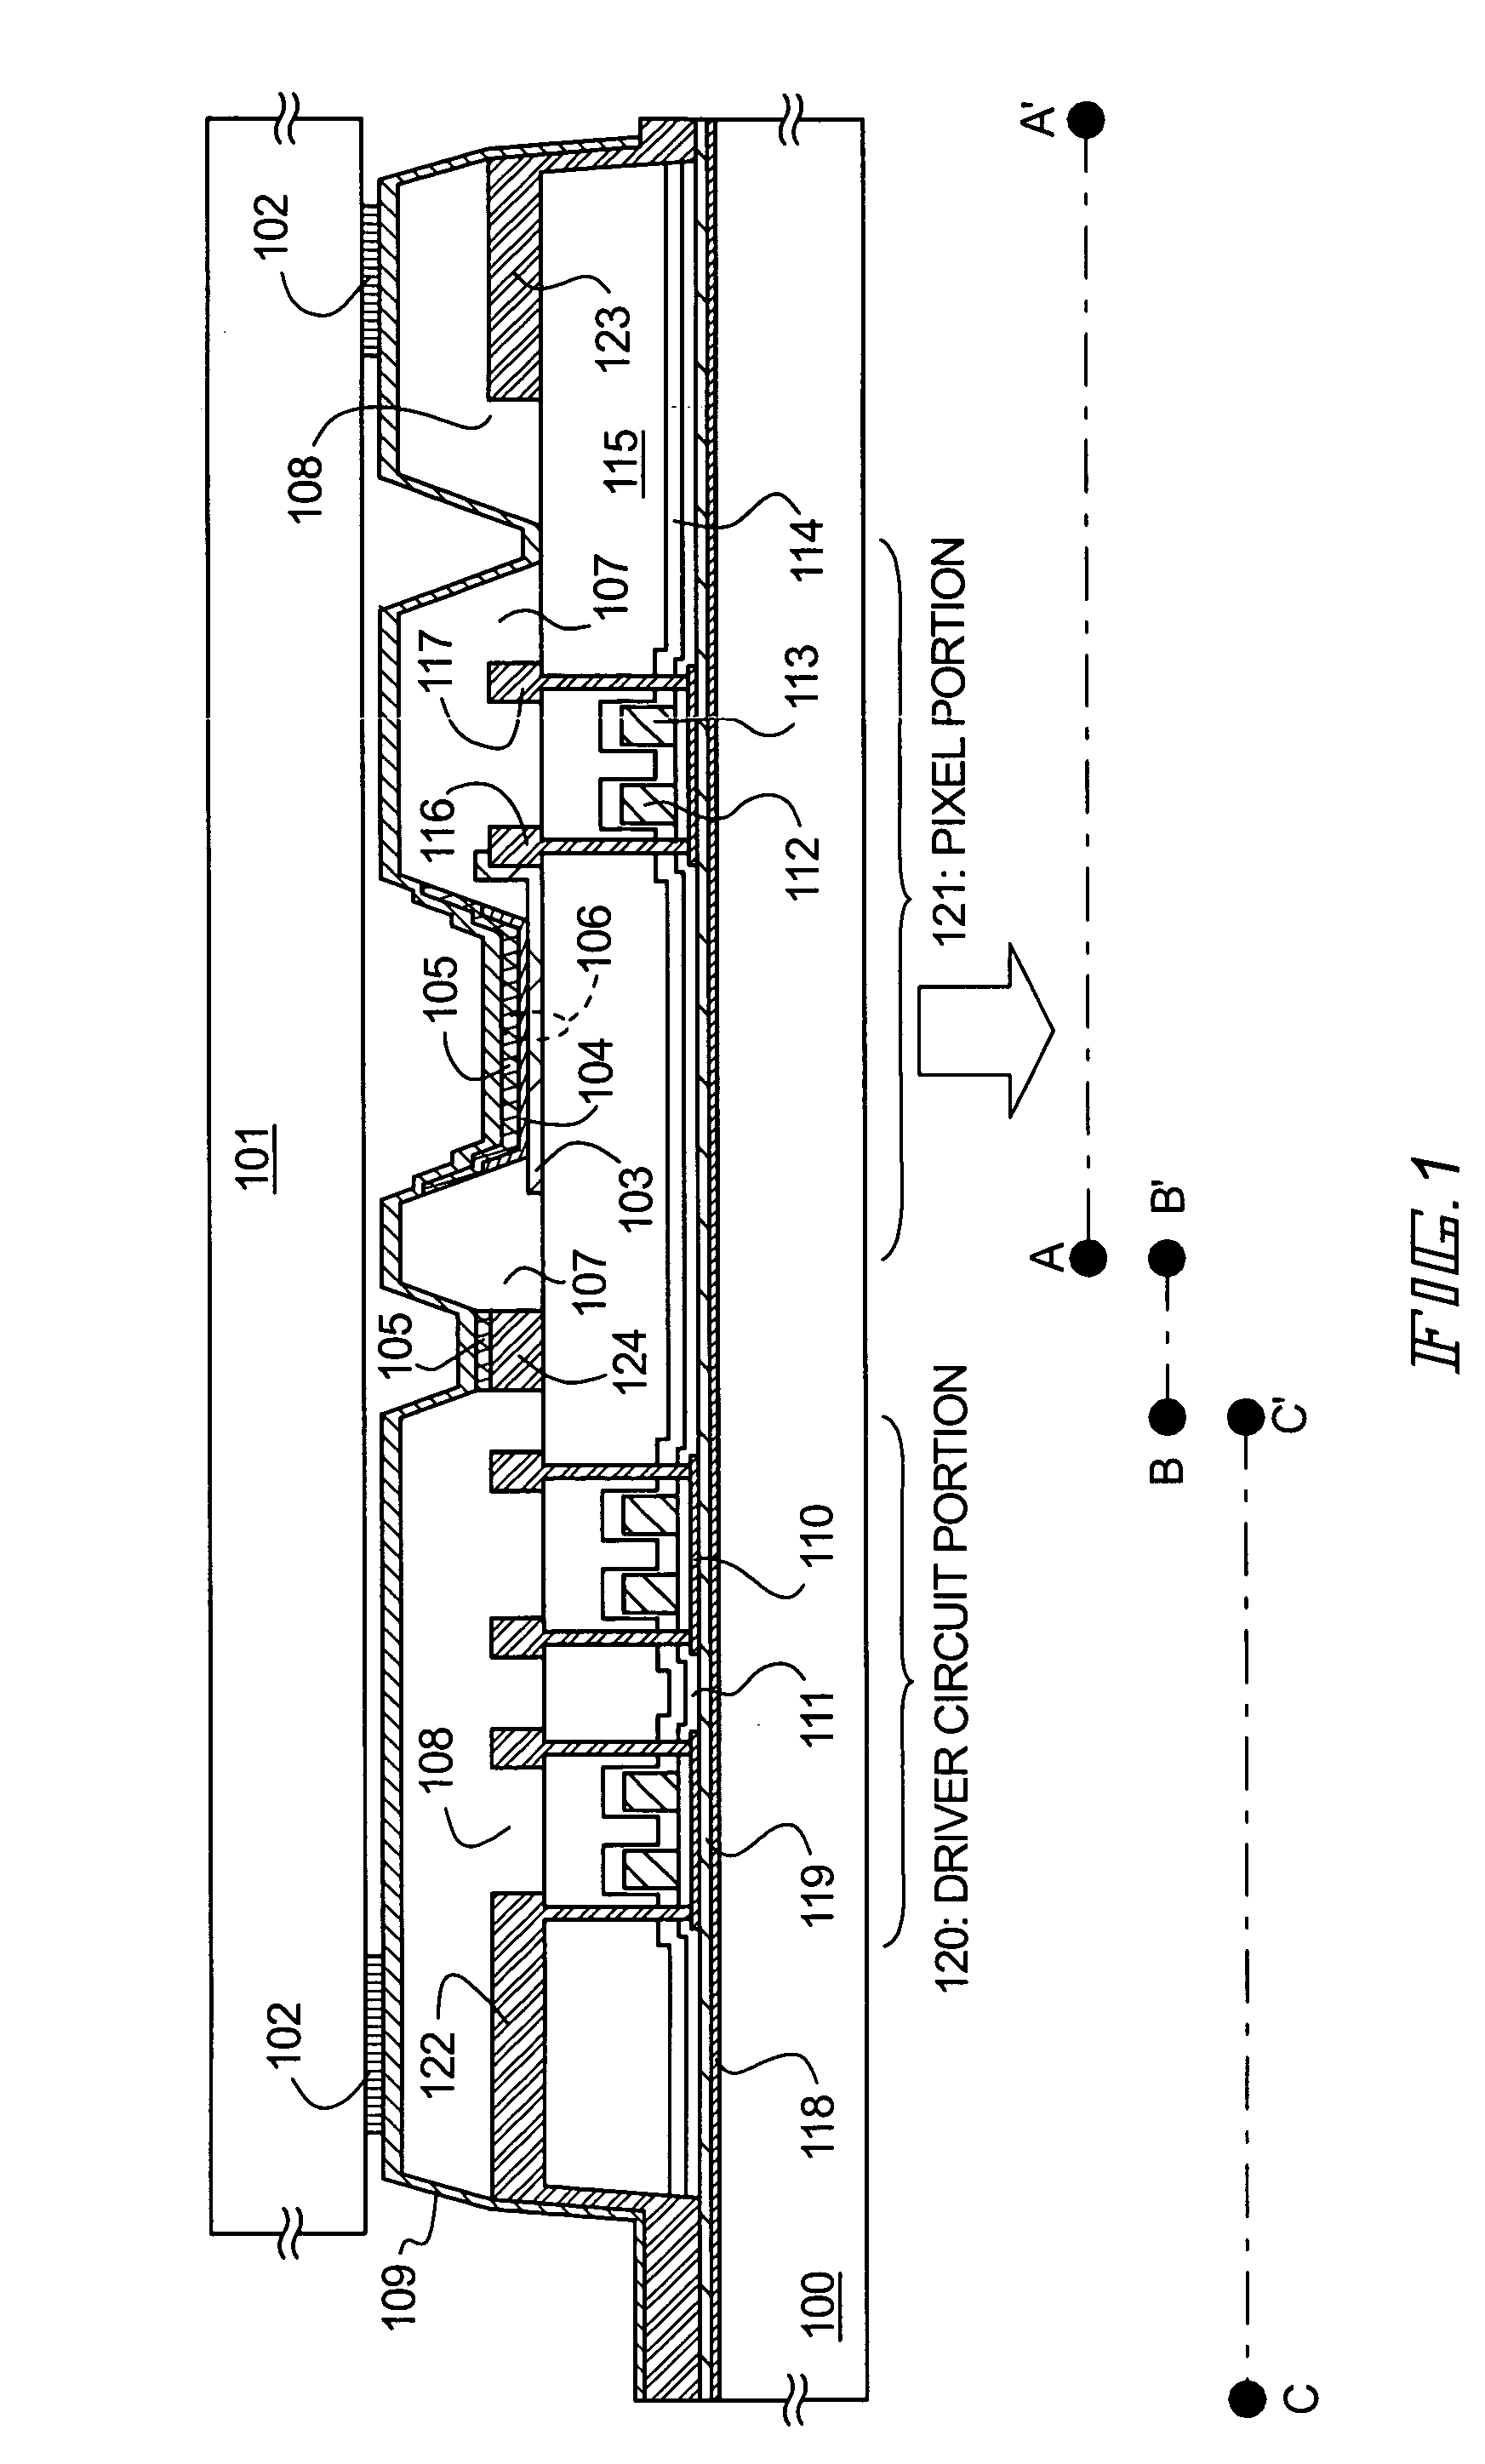 Display device with sealing structure for protecting organic light emitting element